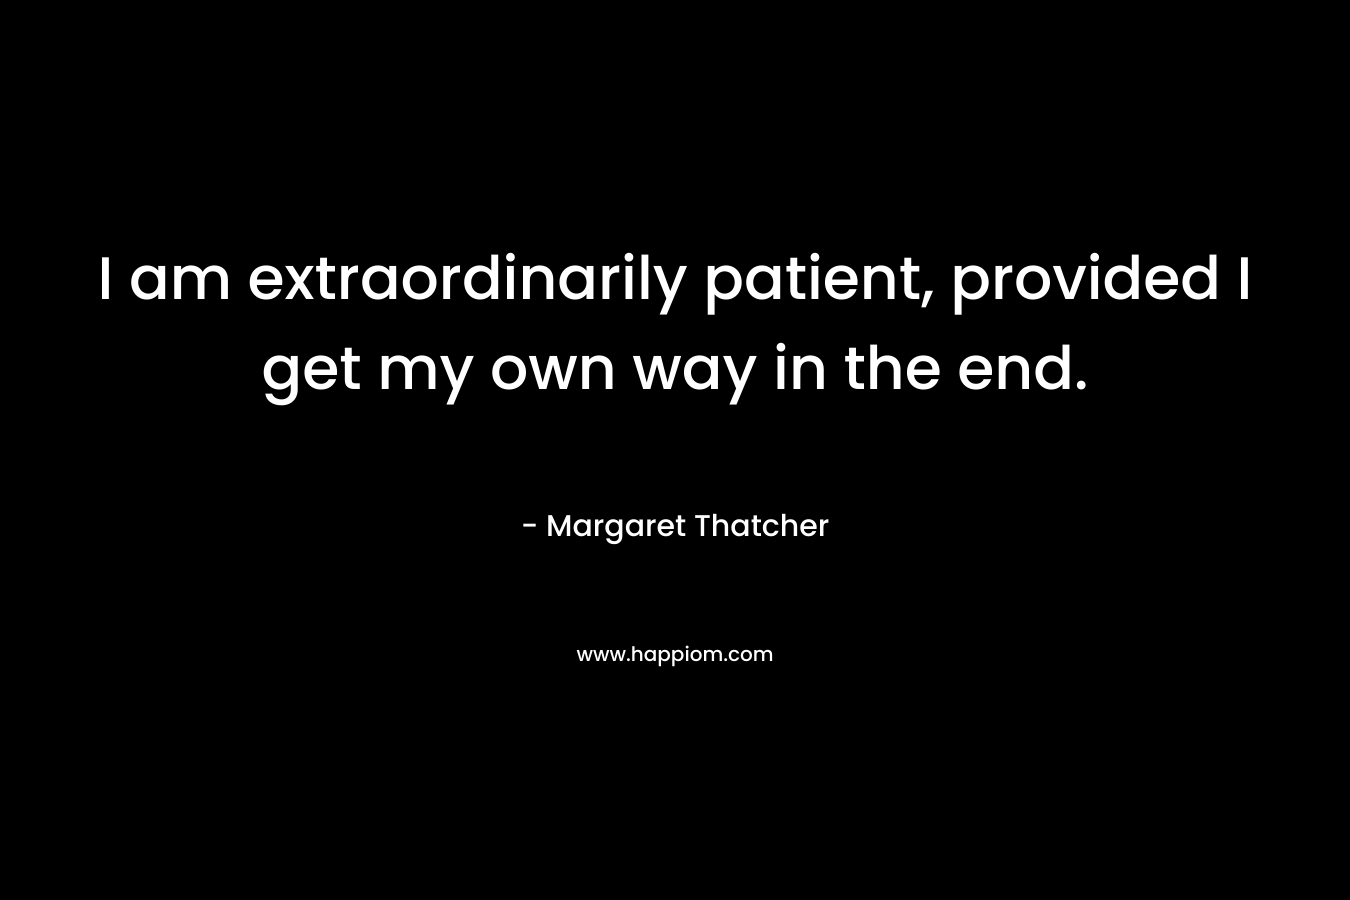 I am extraordinarily patient, provided I get my own way in the end. – Margaret Thatcher